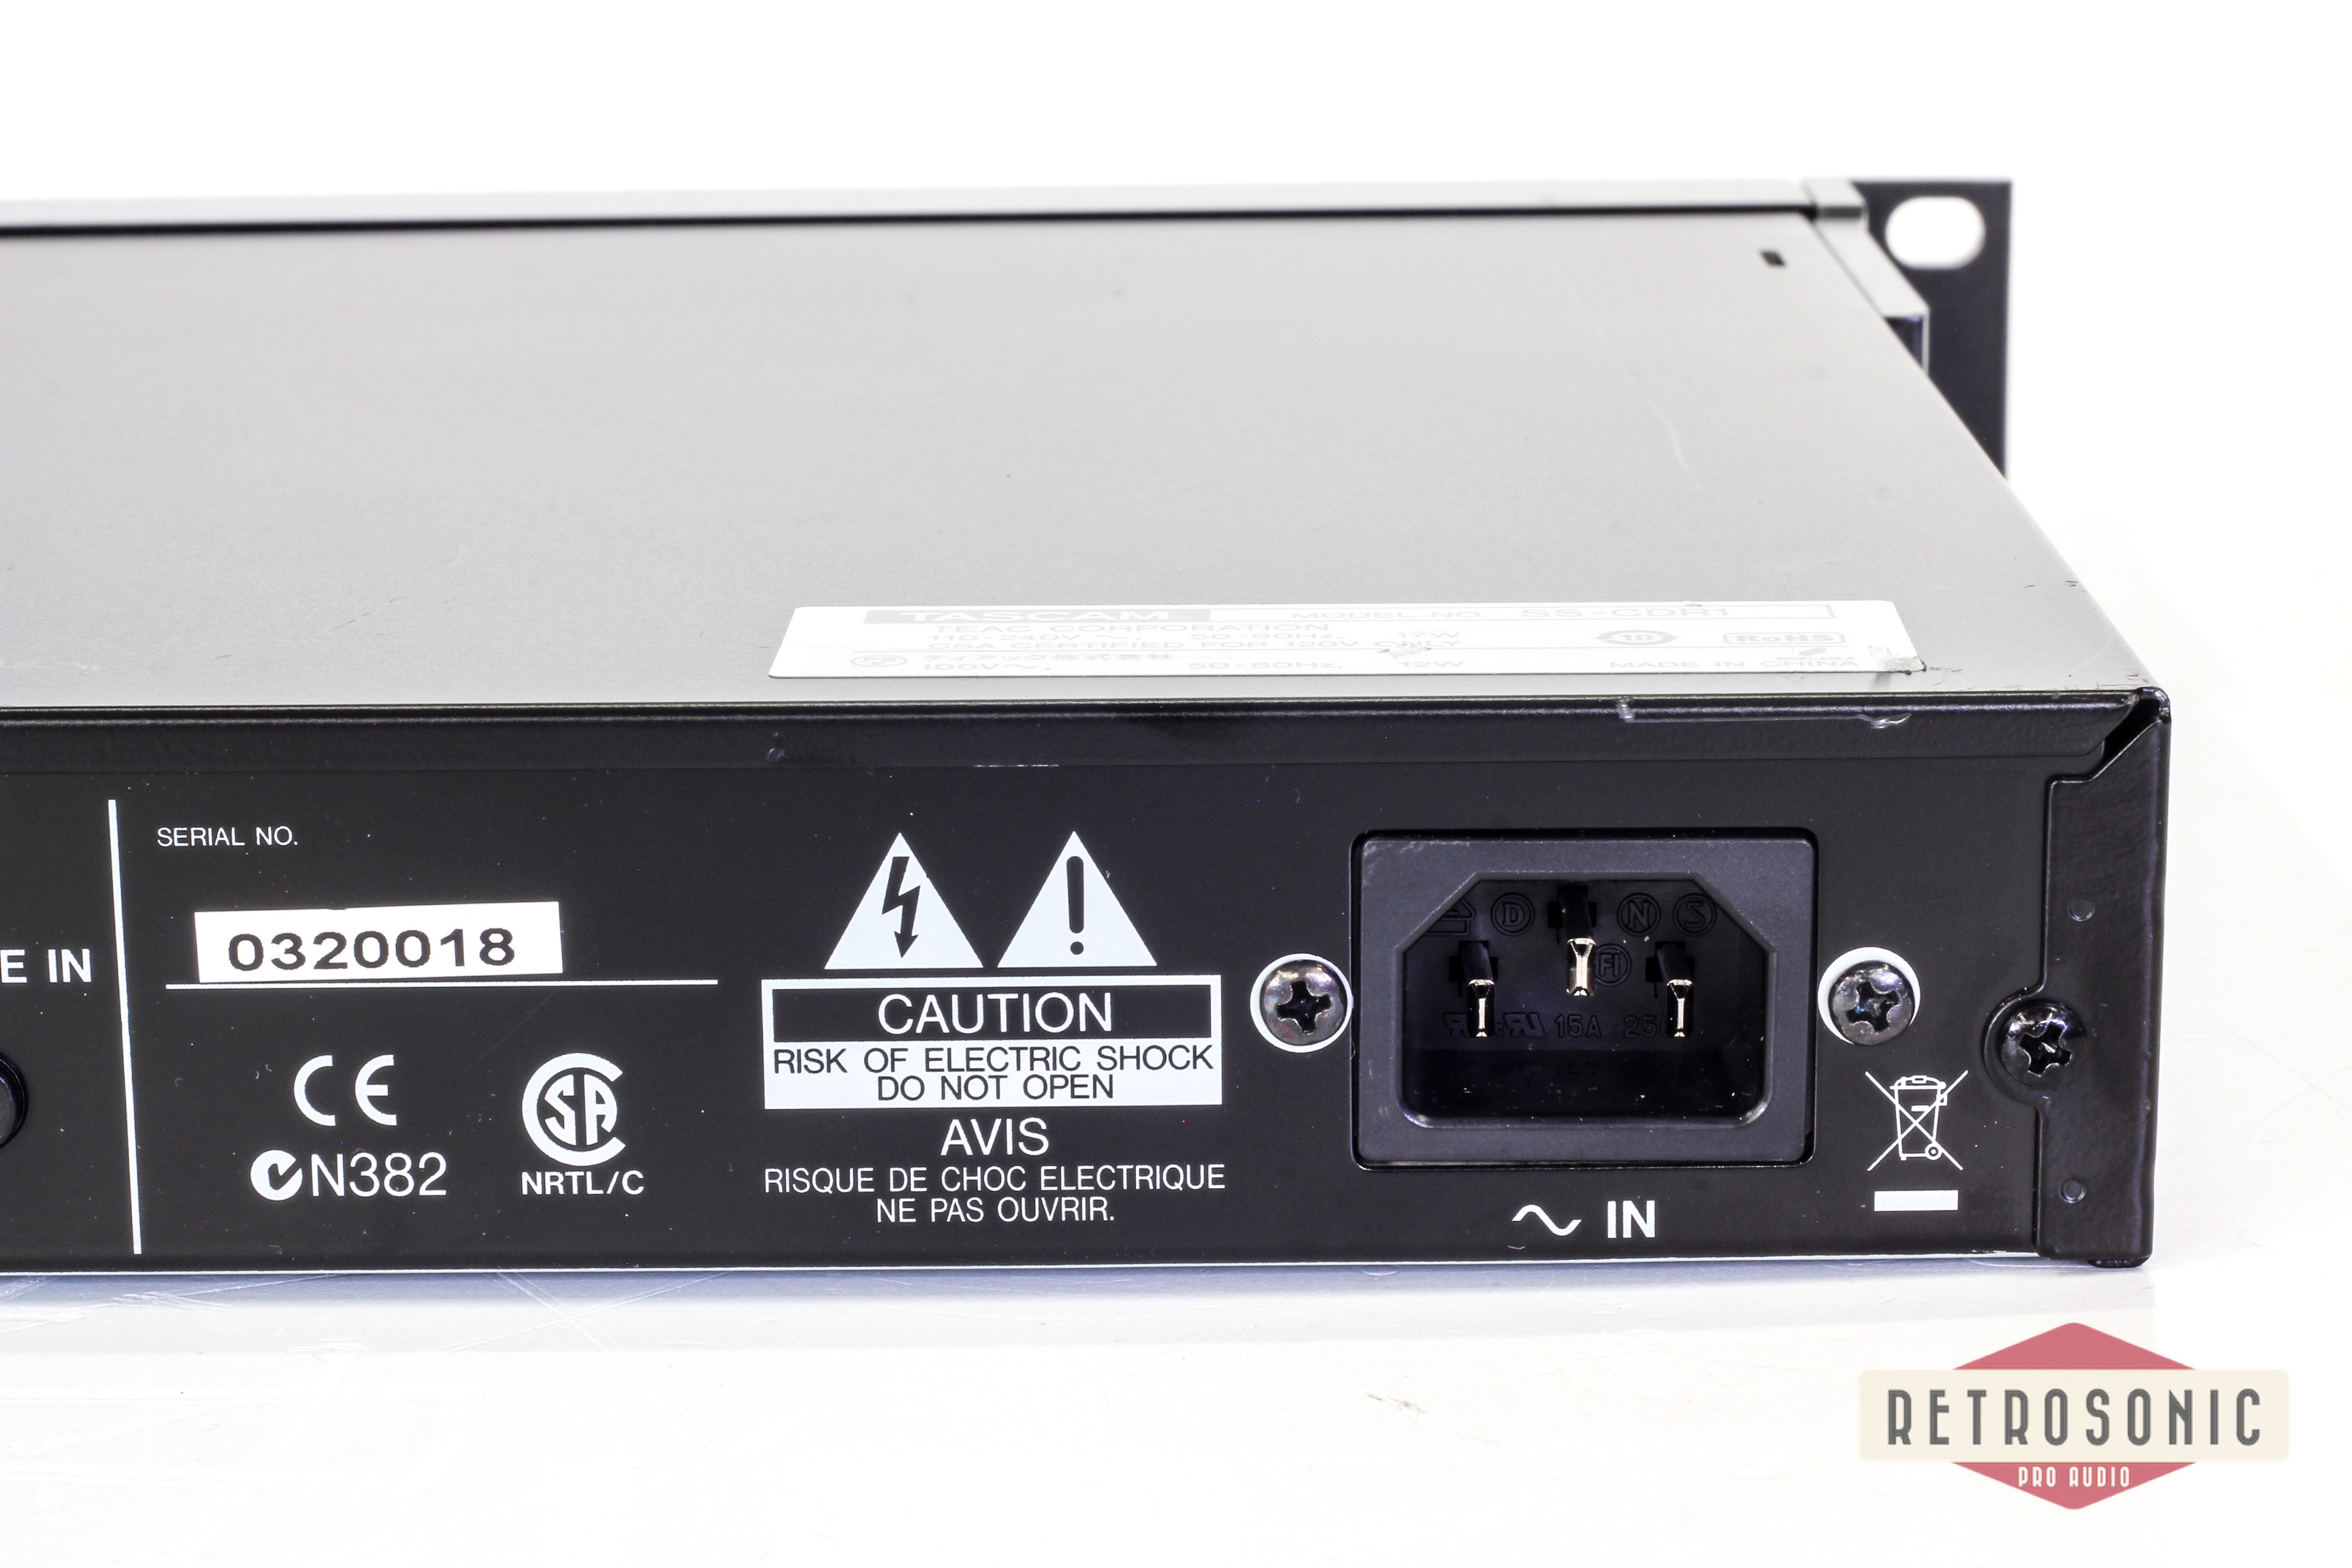 Tascam SS-CDR1 CD-Recorder/Player, solid state player